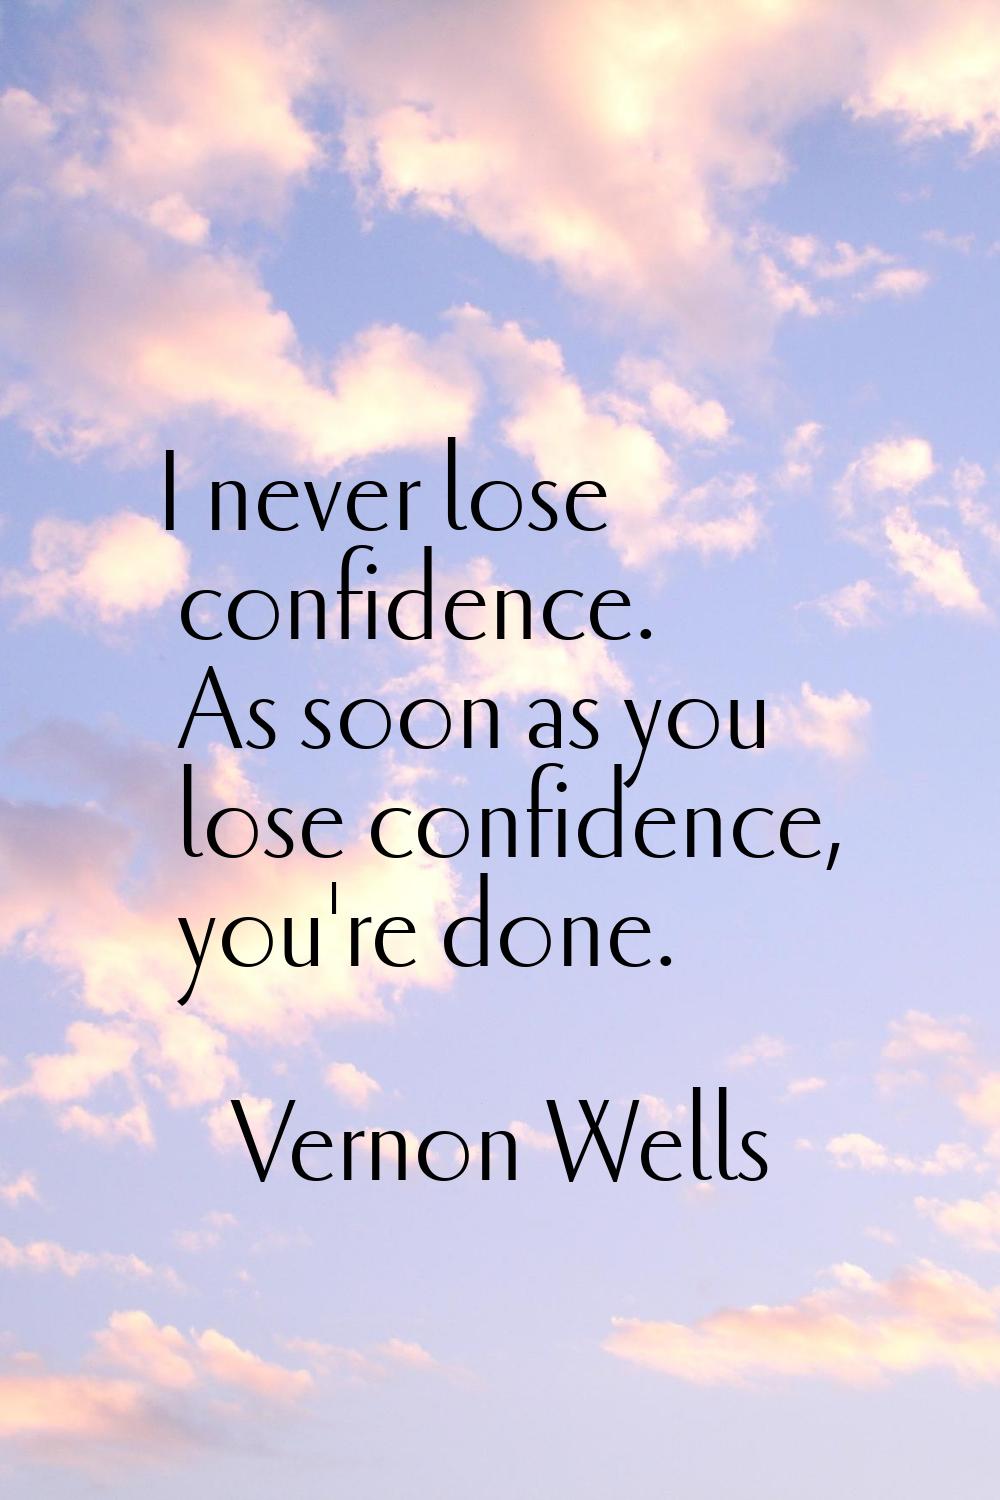 I never lose confidence. As soon as you lose confidence, you're done.